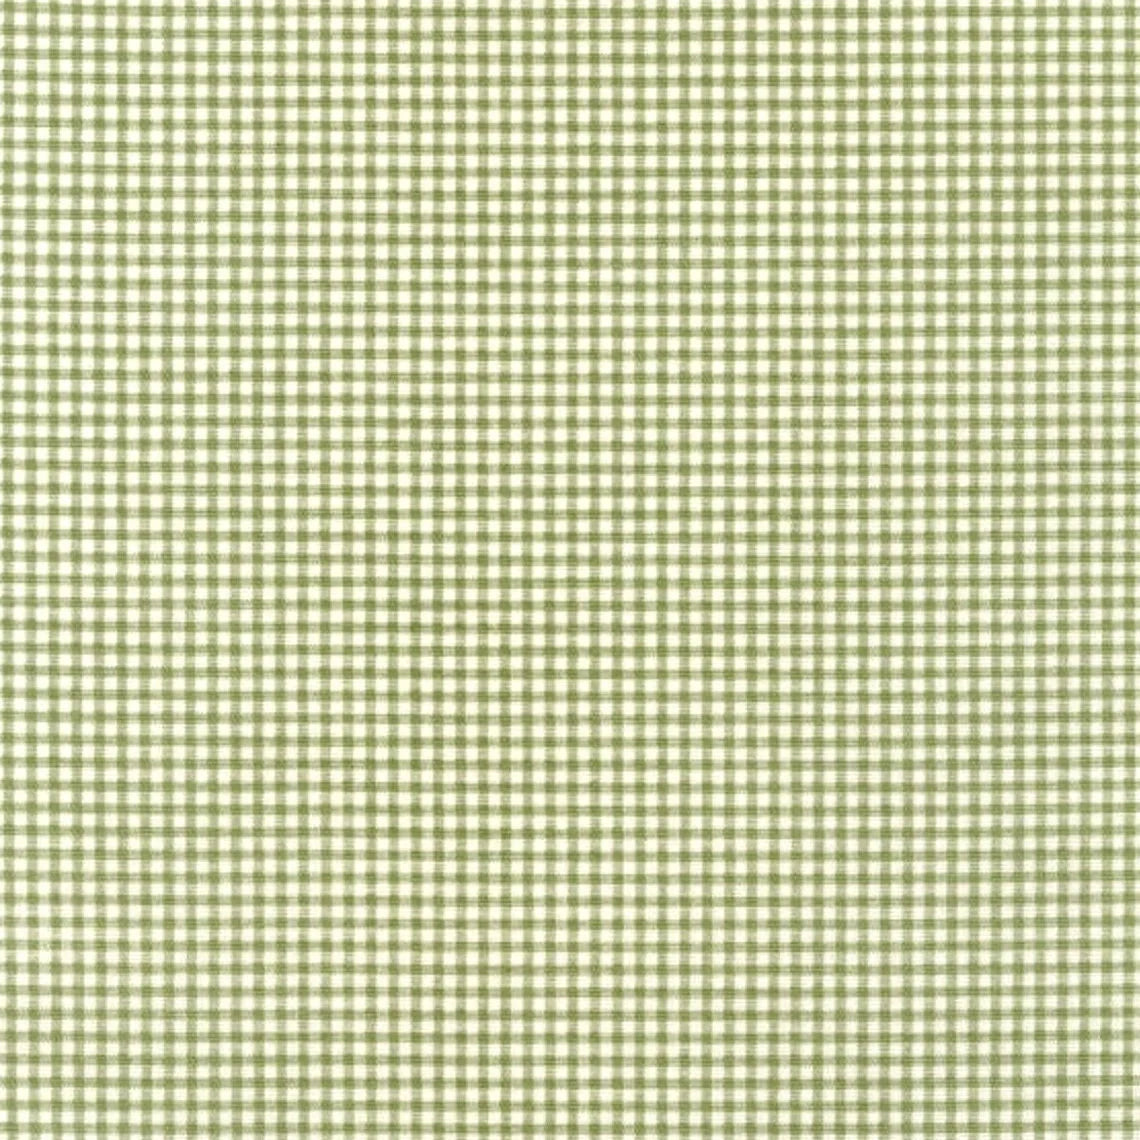 tailored tier cafe curtain panels pair in farmhouse jungle green gingham check